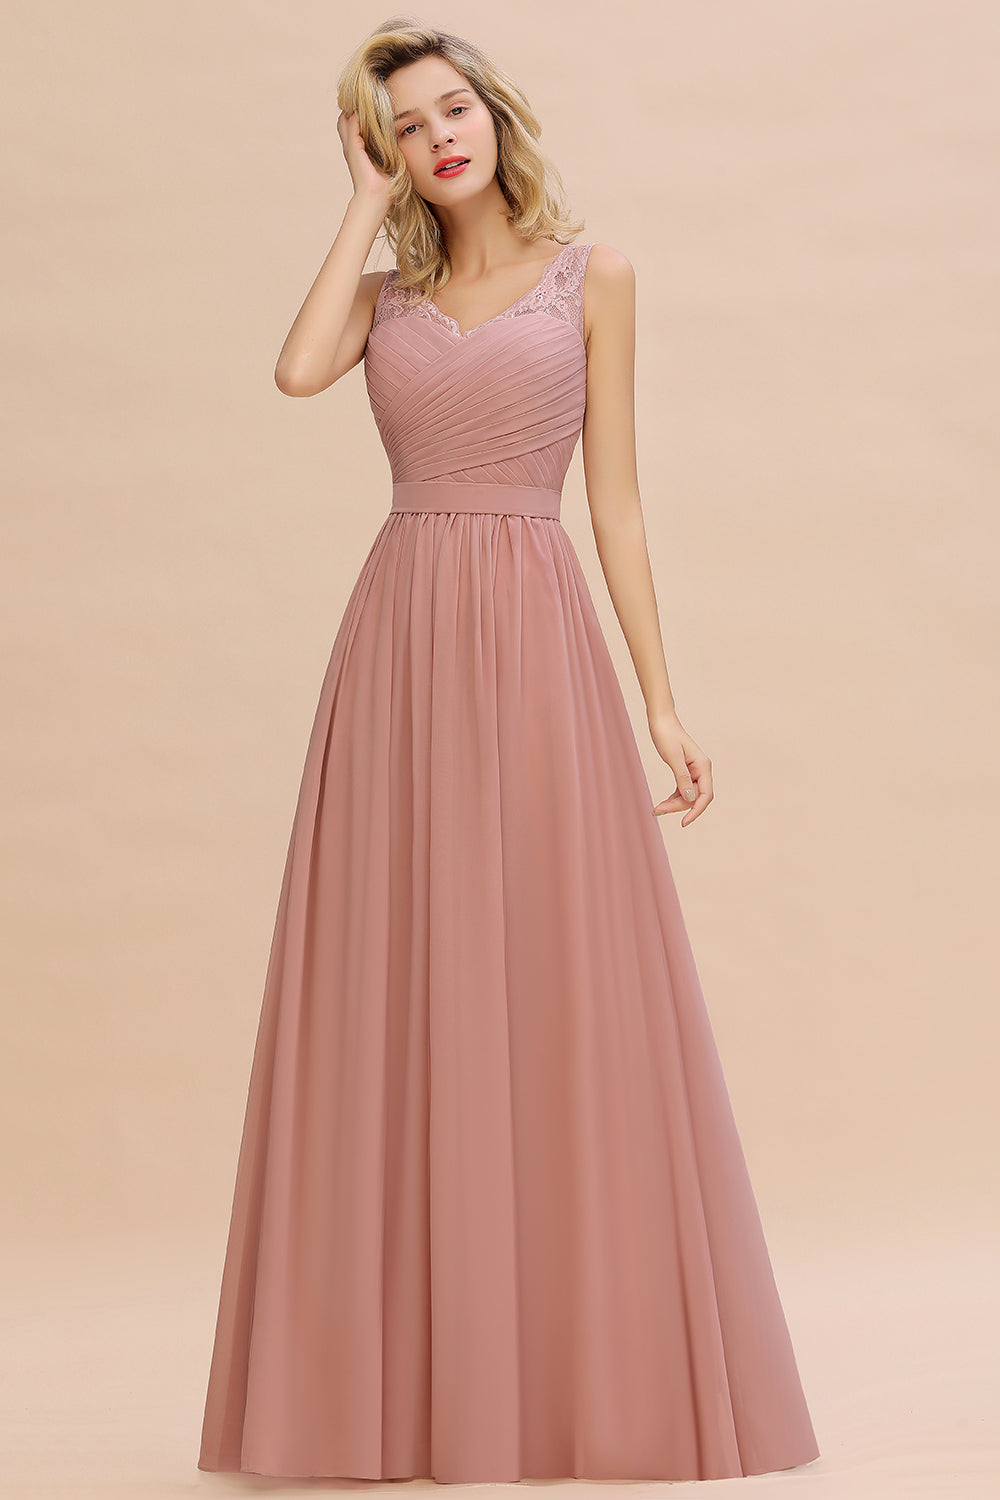 Load image into Gallery viewer, Classy Long A-line V-neck Wide Straps Ruched Chiffon Bridesmaid Dress-BIZTUNNEL
